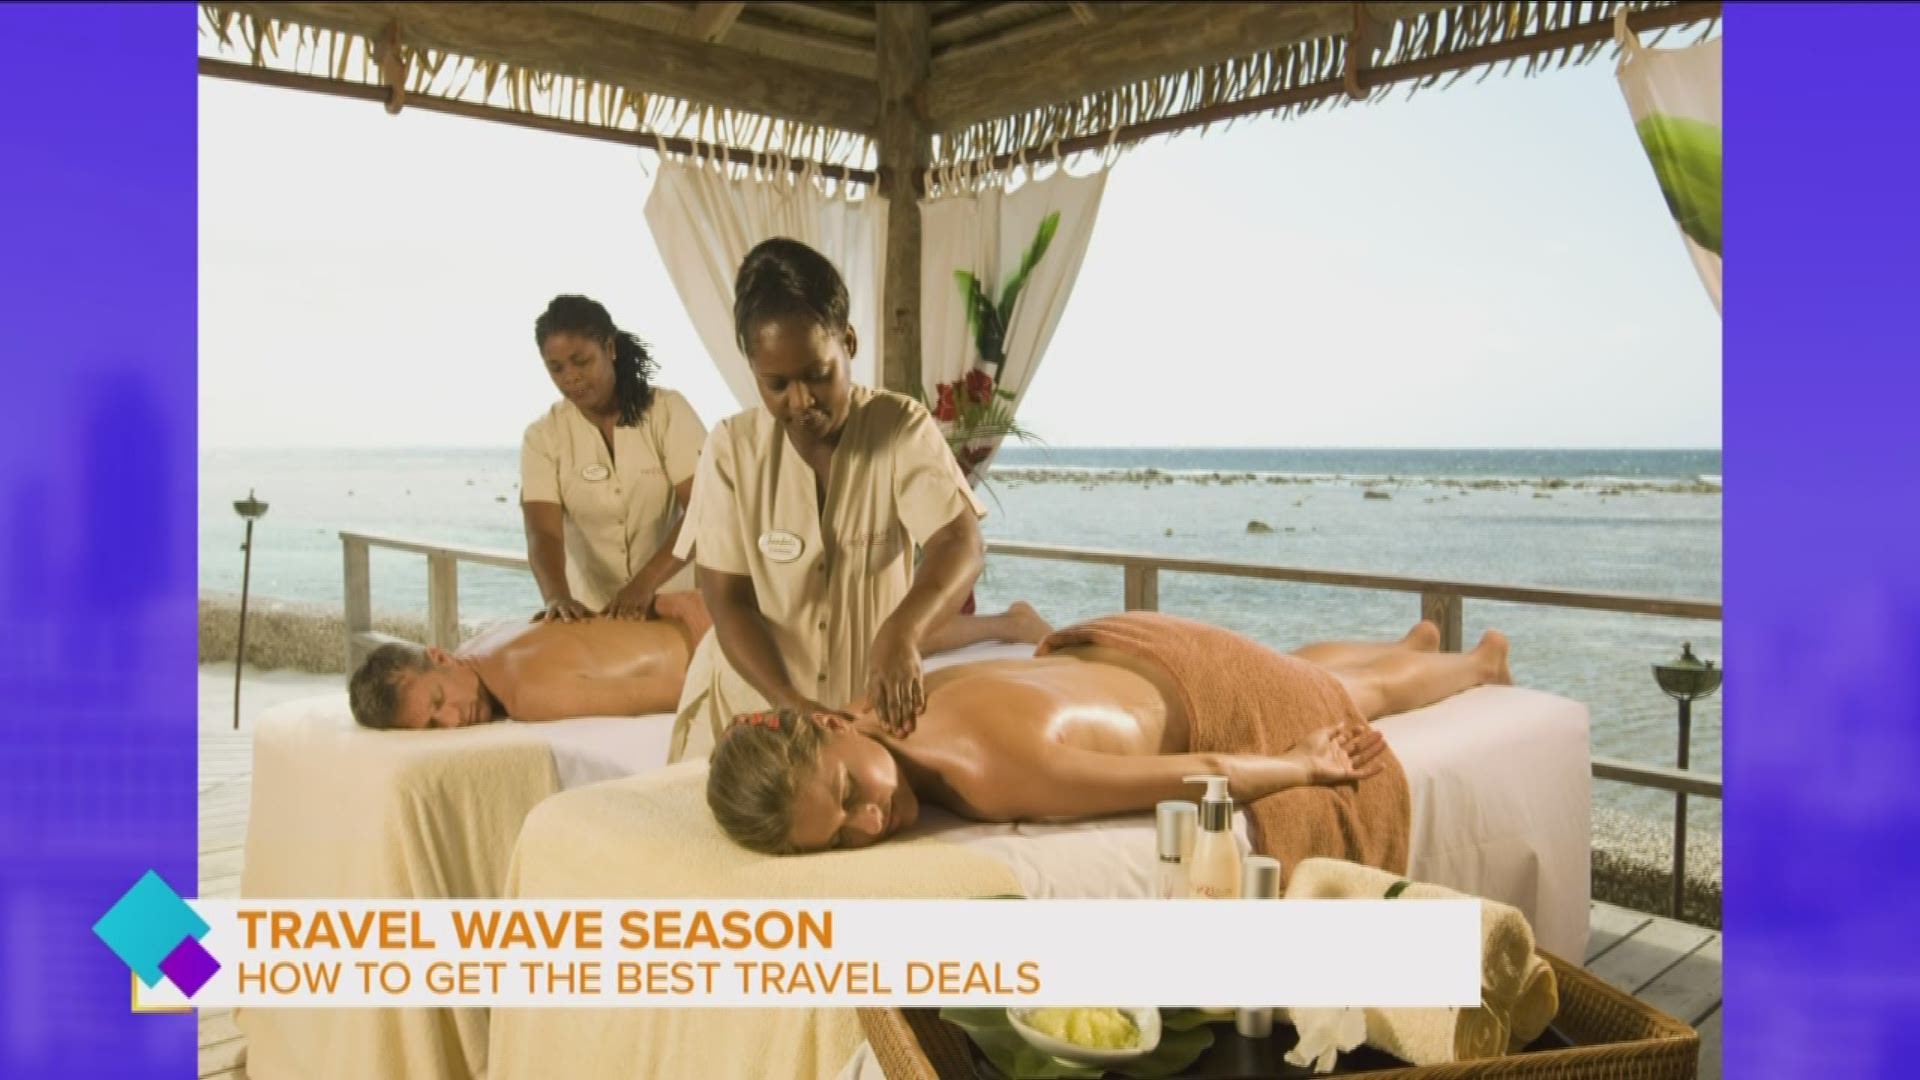 Mann Travels shares the hottest destinations that offer the best vacation deals.